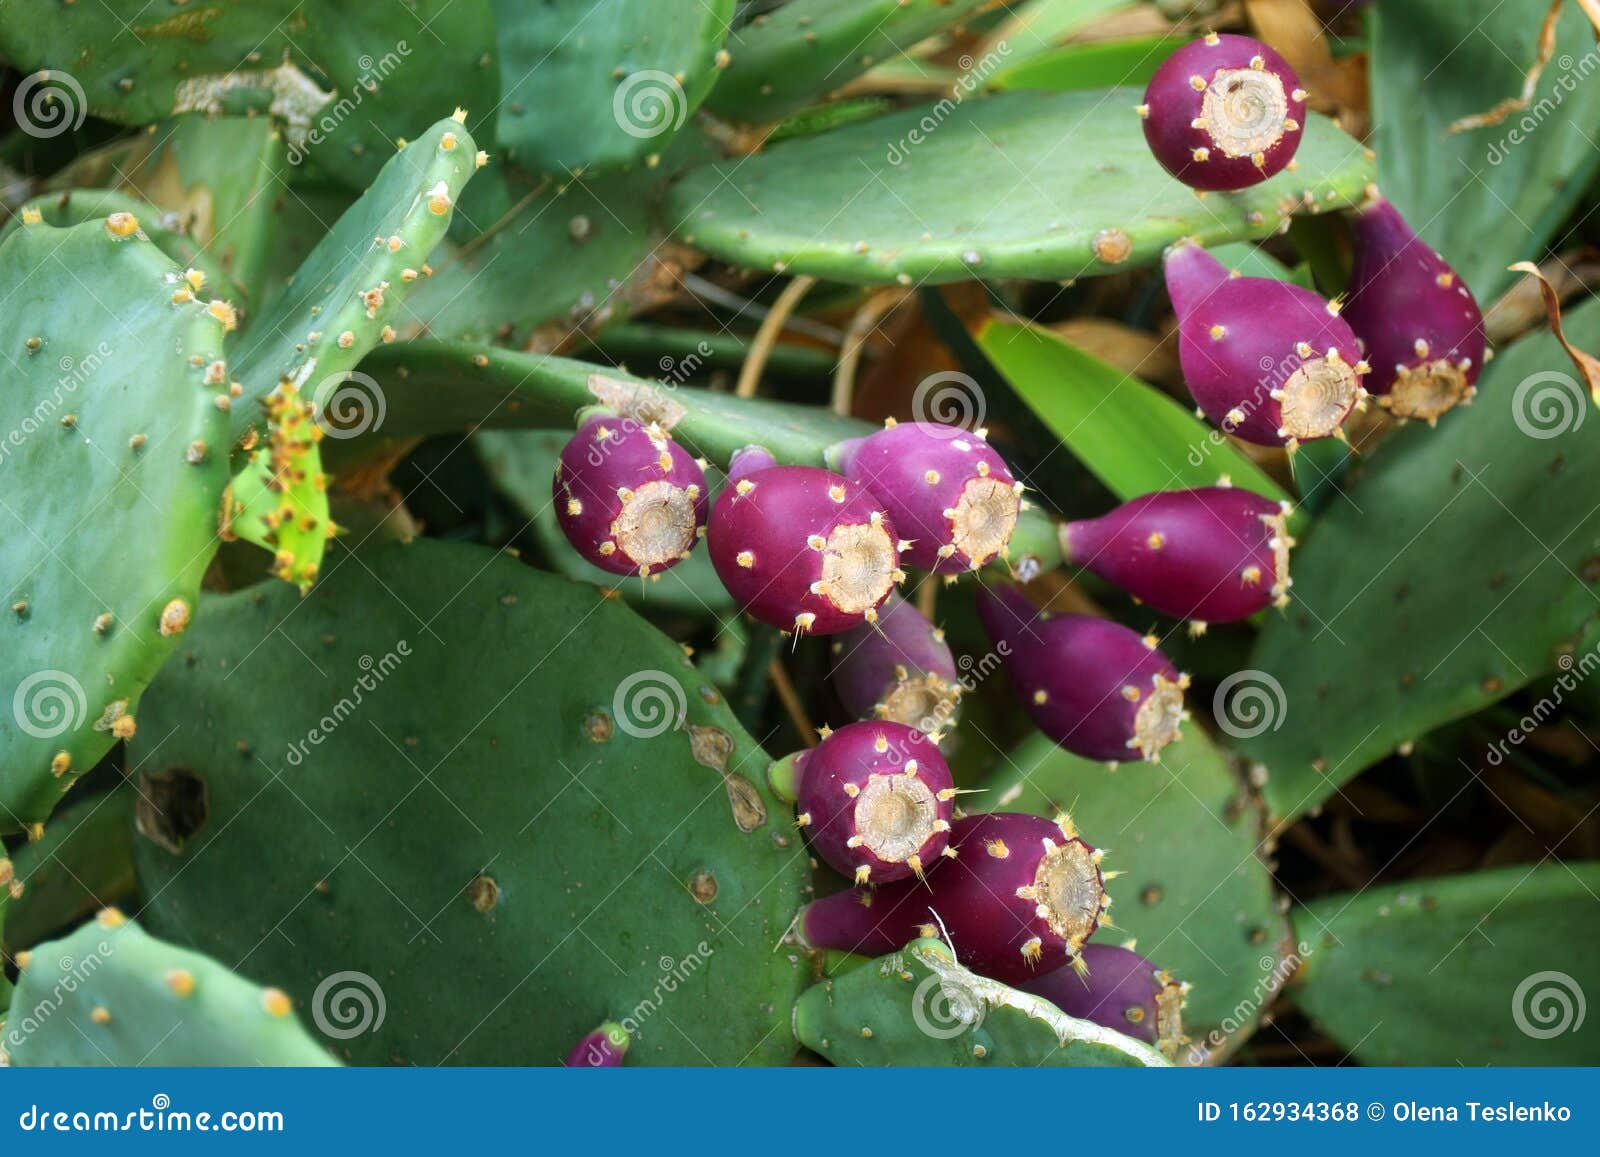 Prickly Pear Cactus With Fruit In Purple Color Cactus Spines Close Up Stock Photo Image Of Whole Colourful 162934368